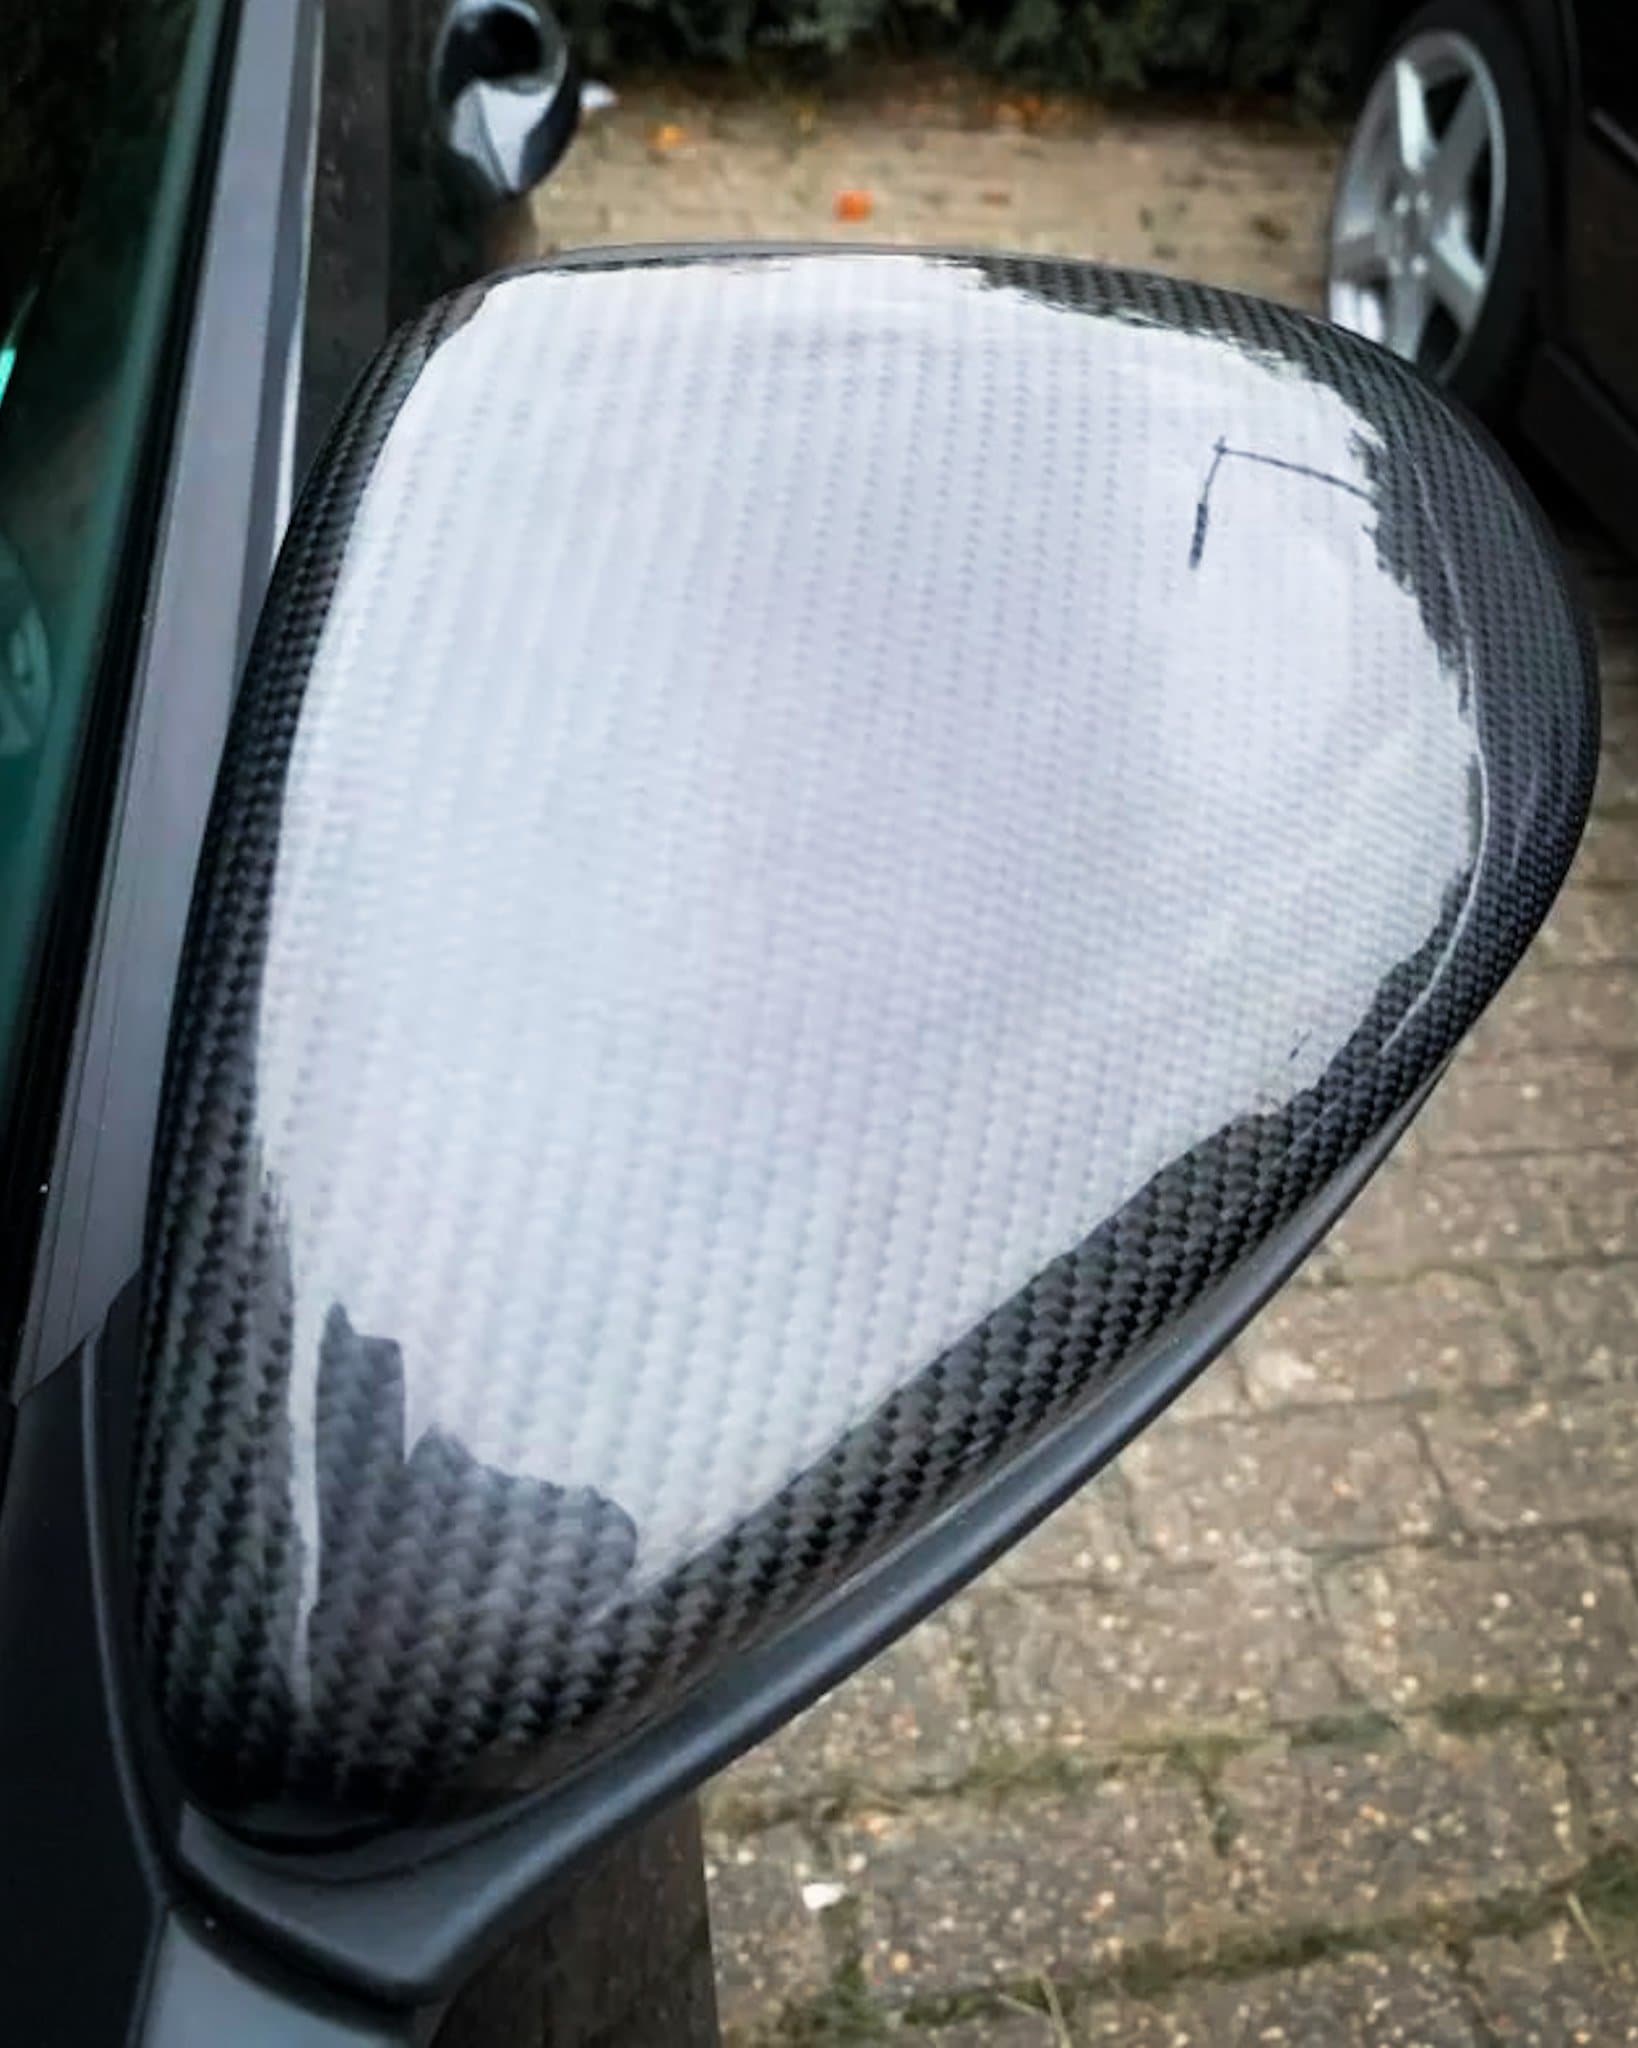 Volkswagen Golf Mk7/Mk7.5 OEM Style Carbon Fibre Replacement Carbon Fibre Mirror Covers - For the VW Golf SE, VW Golf GTI/GTD and VW Golf R Models. Replacing the existing body-coloured or silver mirror covers that come standard on these models with a more aesthetically pleasing carbon fibre mirror cover is a must for any enthusiast.